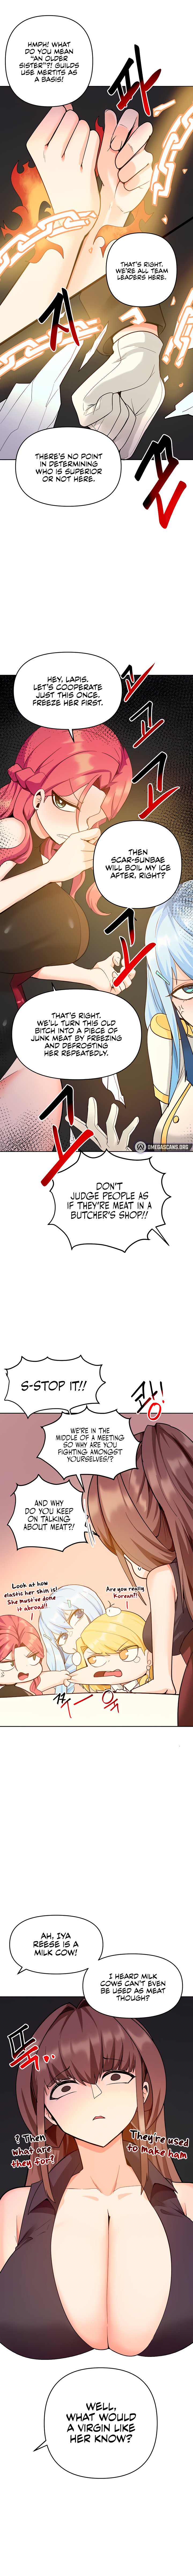 the-hypnosis-app-was-fake-chap-32-4